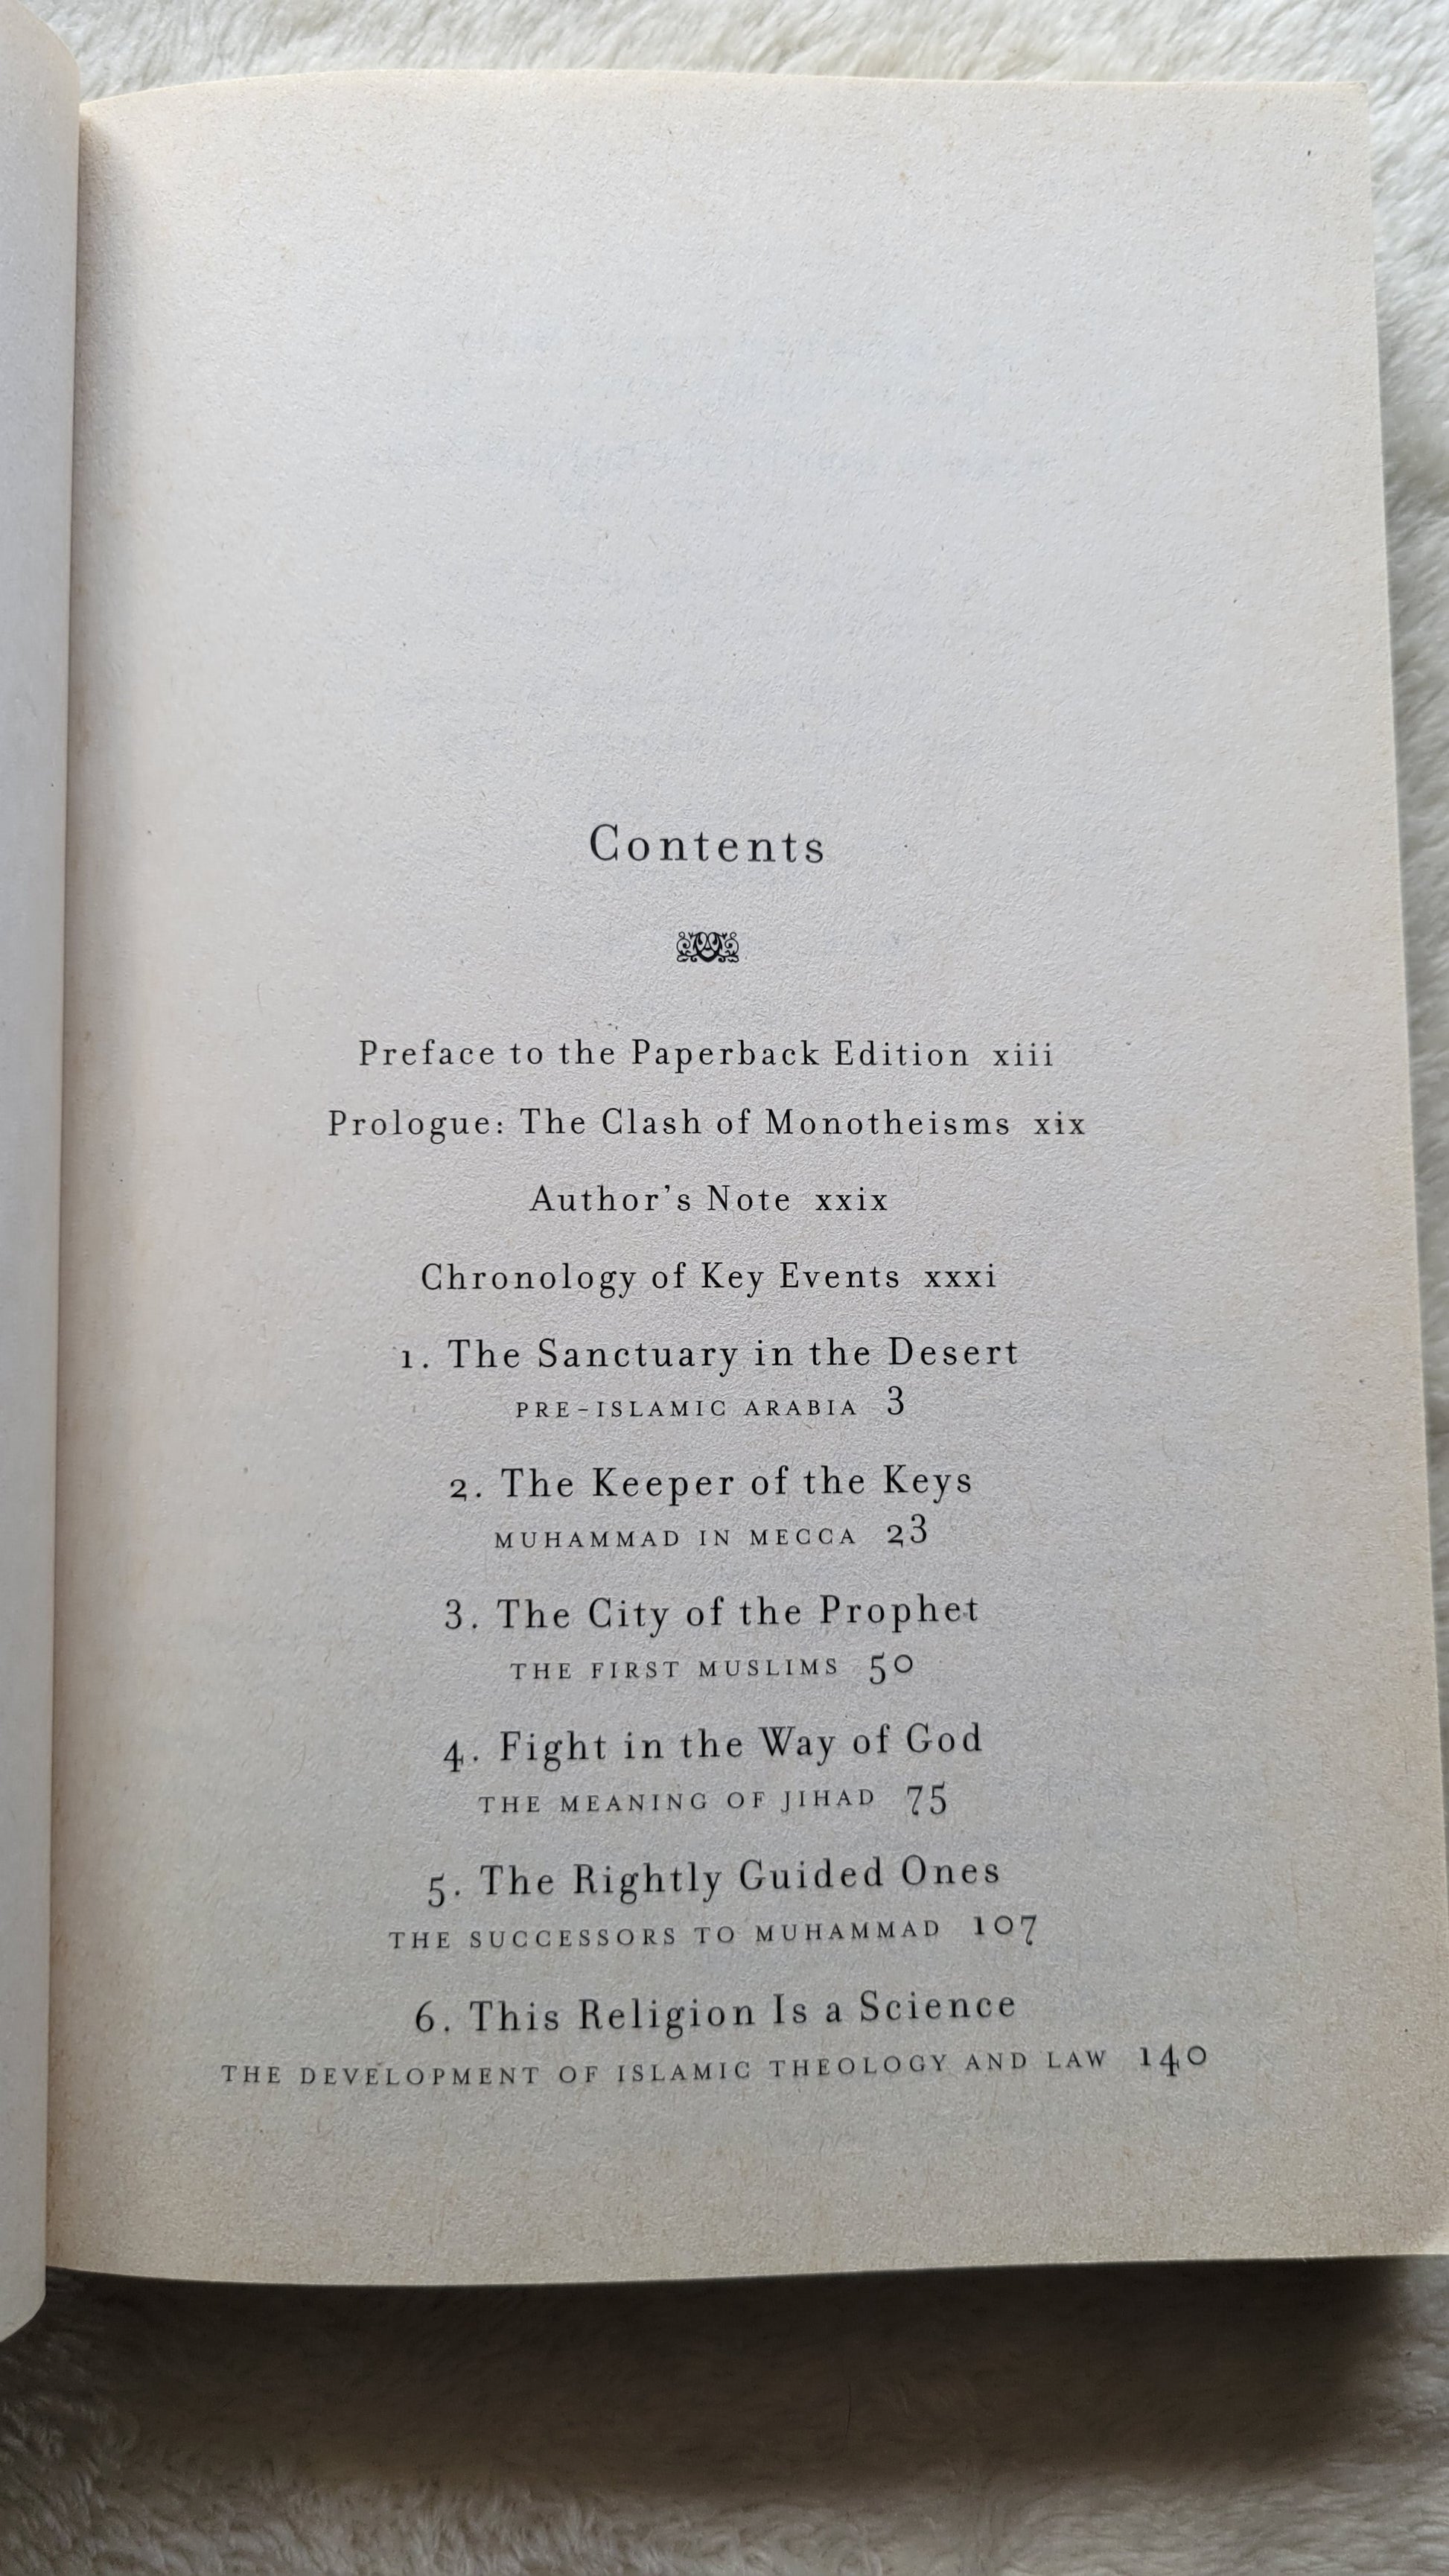 Used book for sale, "No god but God: The Origins, Evolution, and Future of Islam" by Reza Aslan, Random House publishers, 2006. View of table of contents.